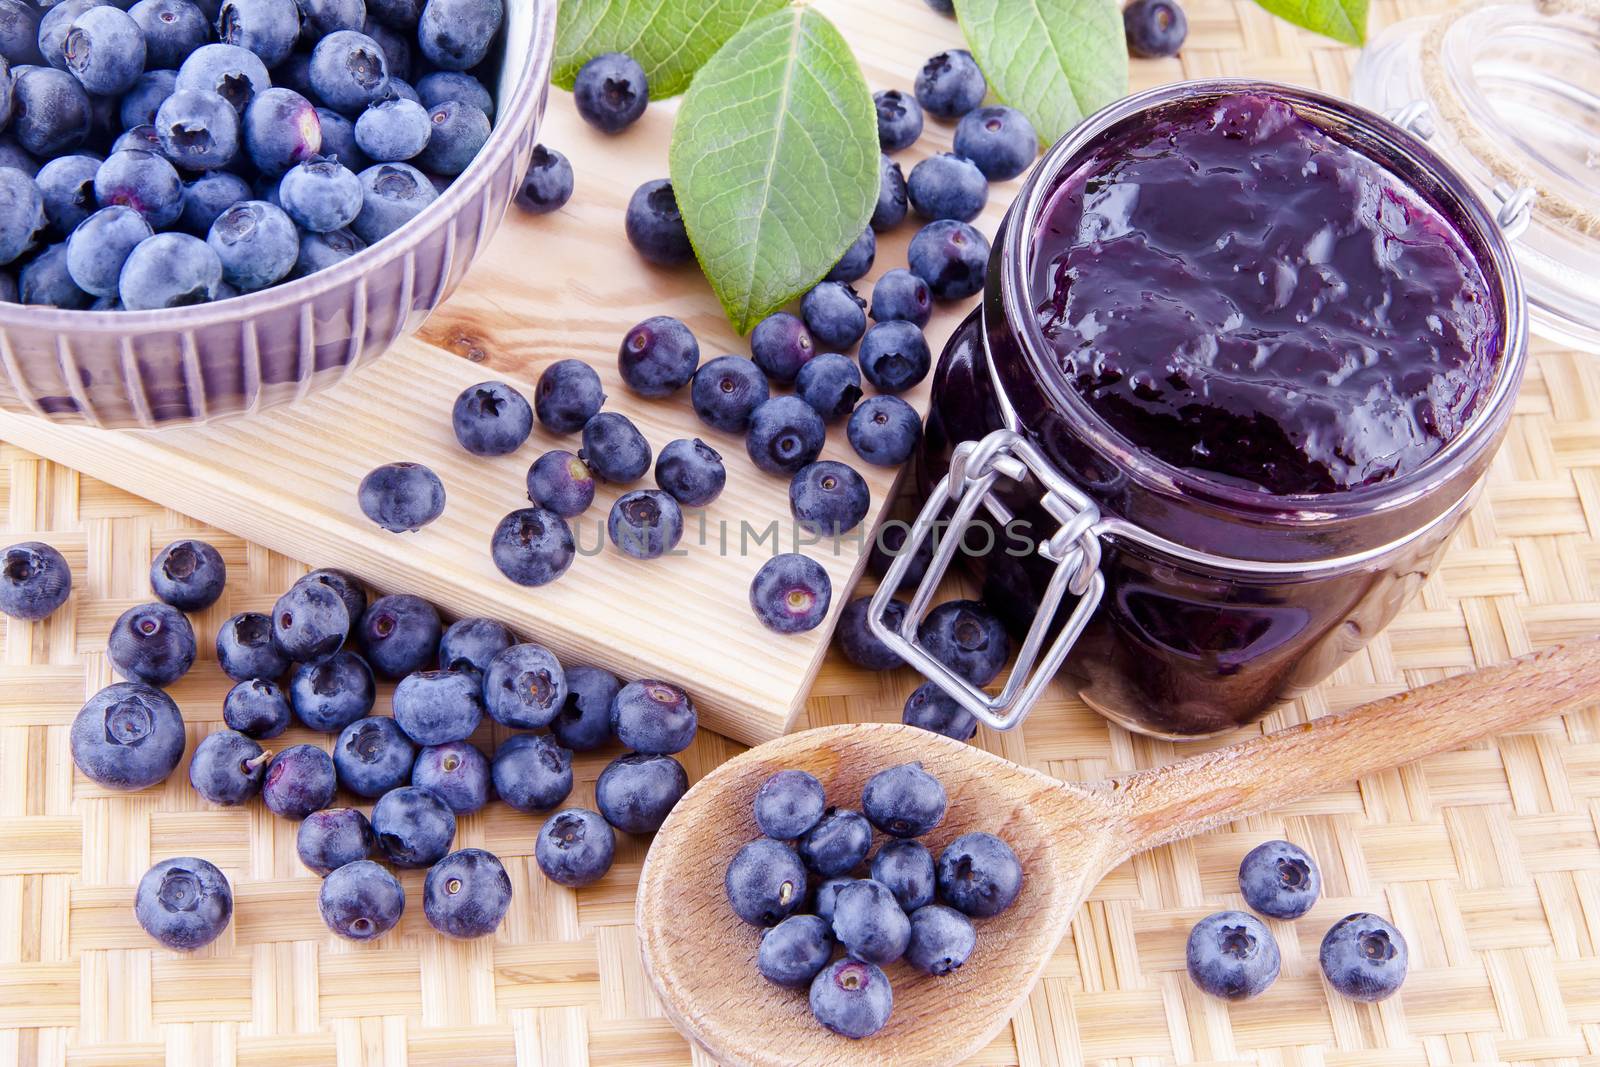 Blueberry jam and fresh fruits on the kitchen table